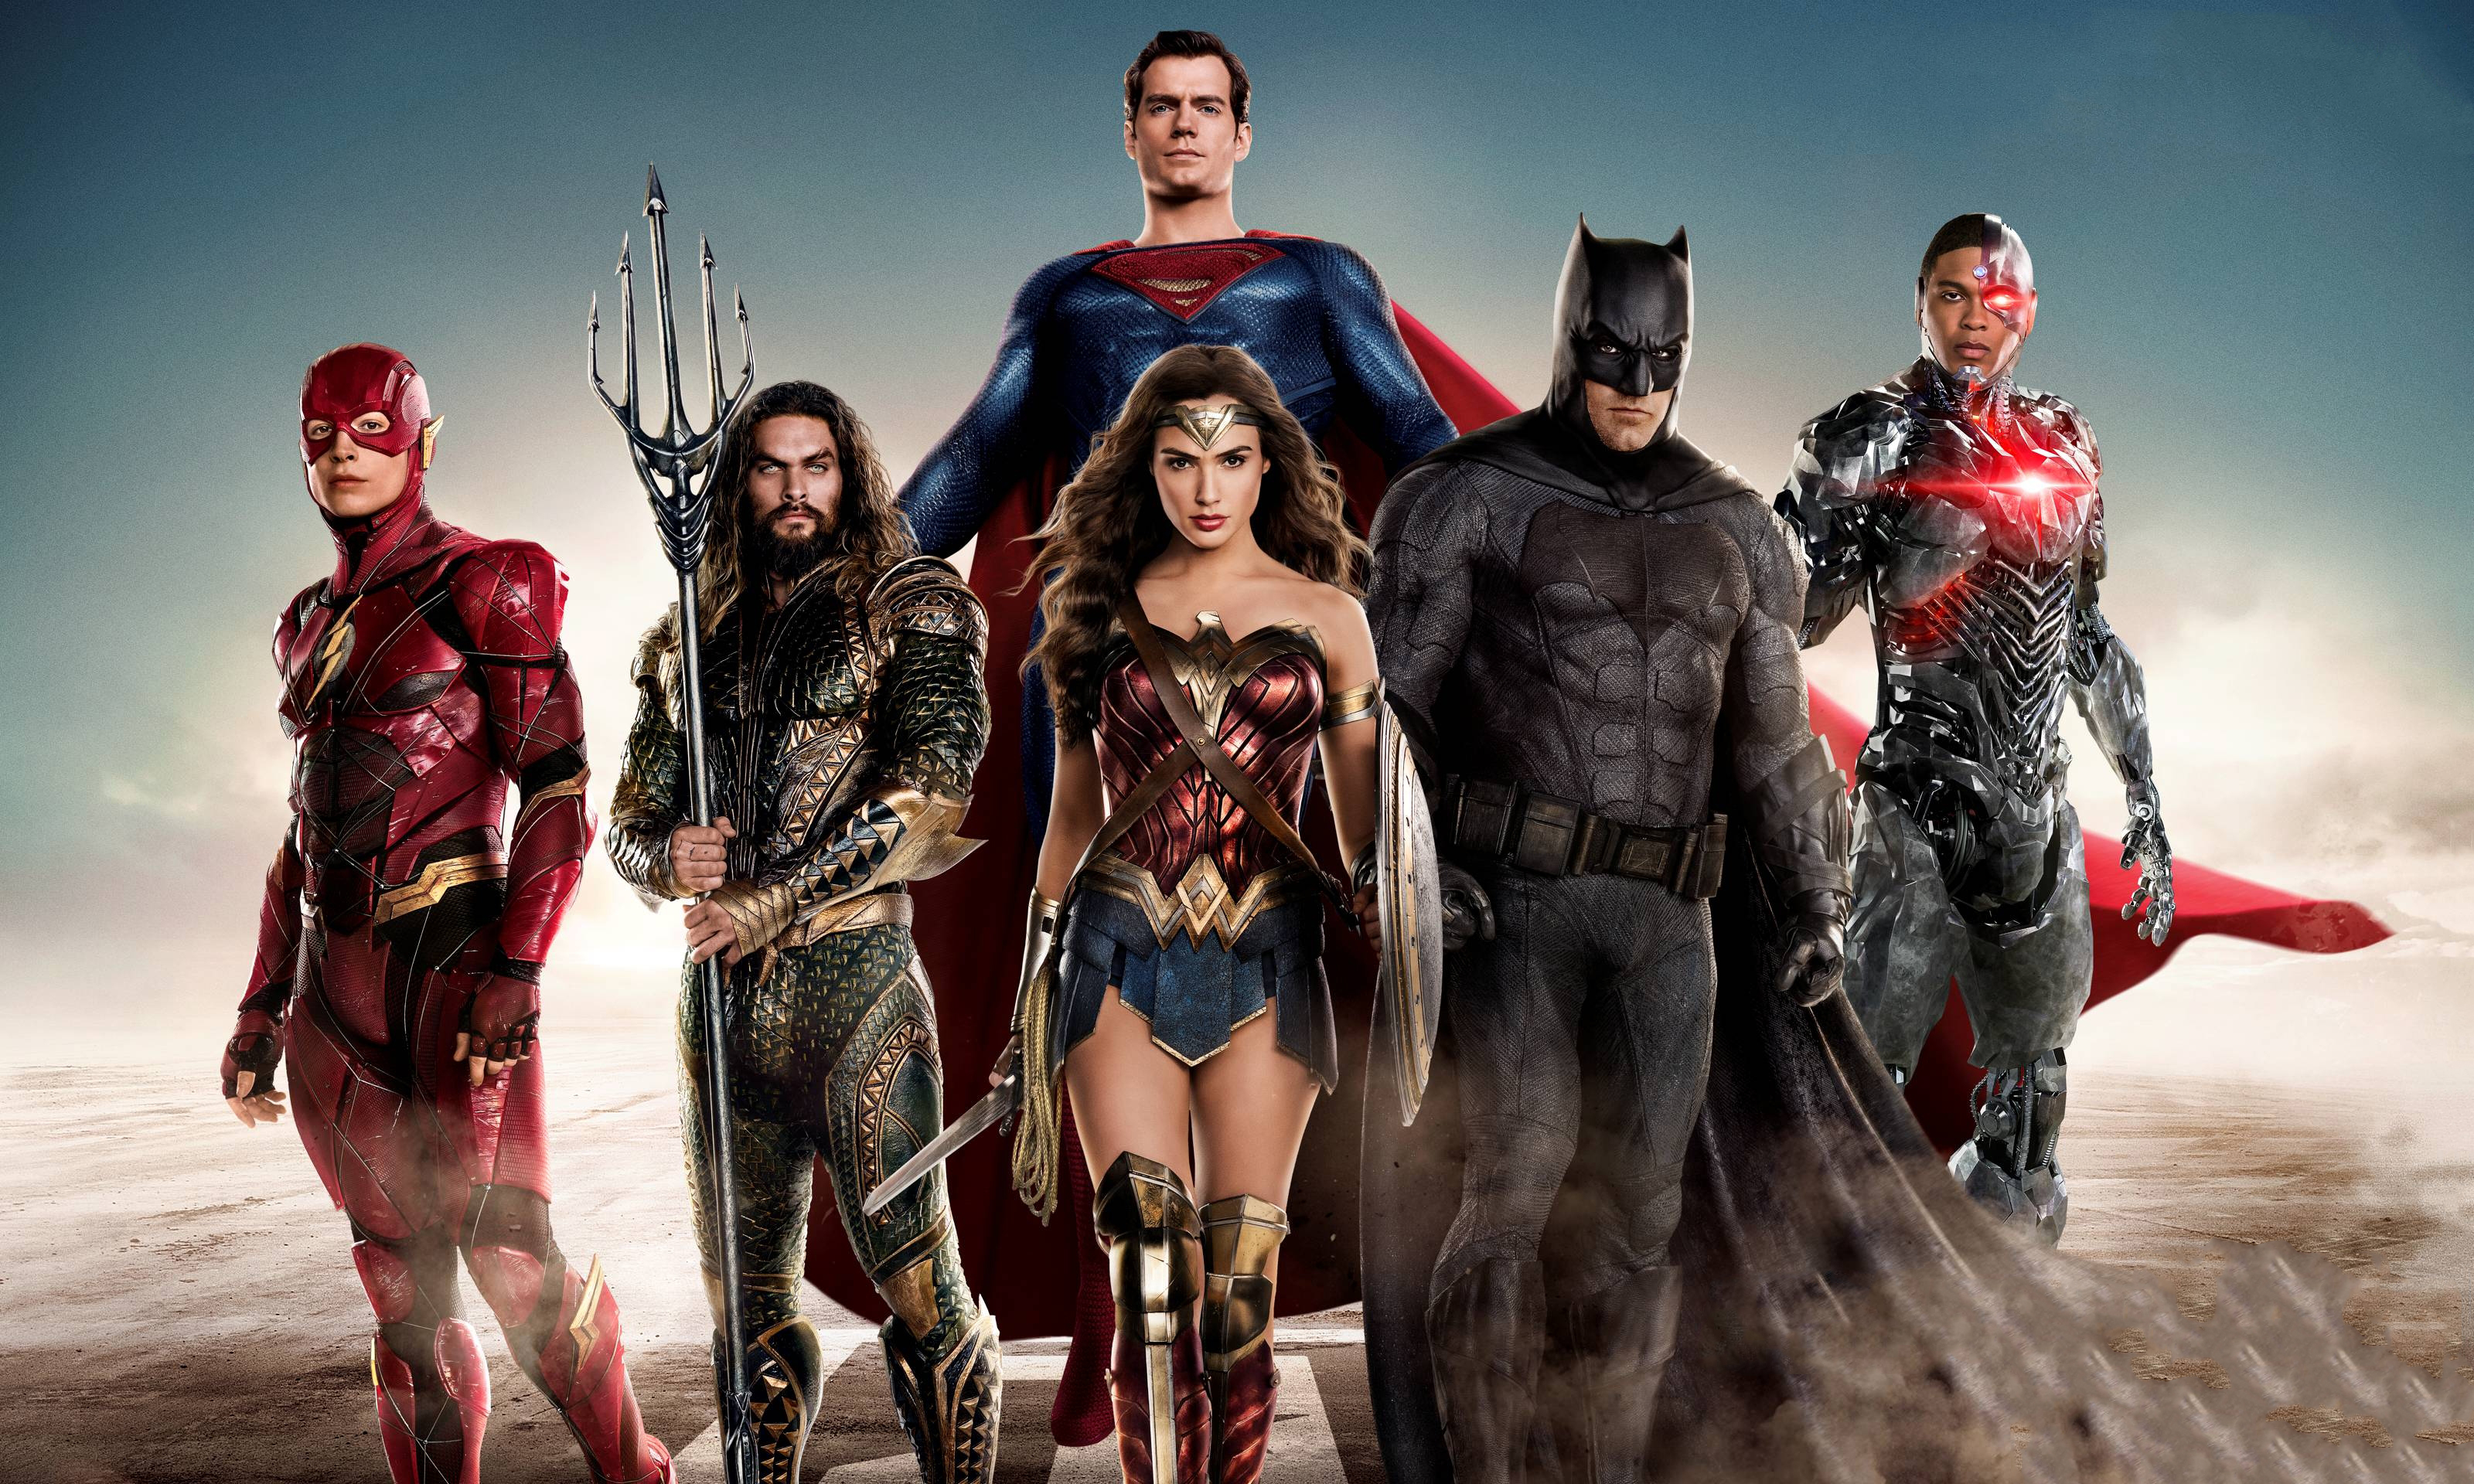 justice league movie wallpaper,fictional character,superhero,justice league,movie,games